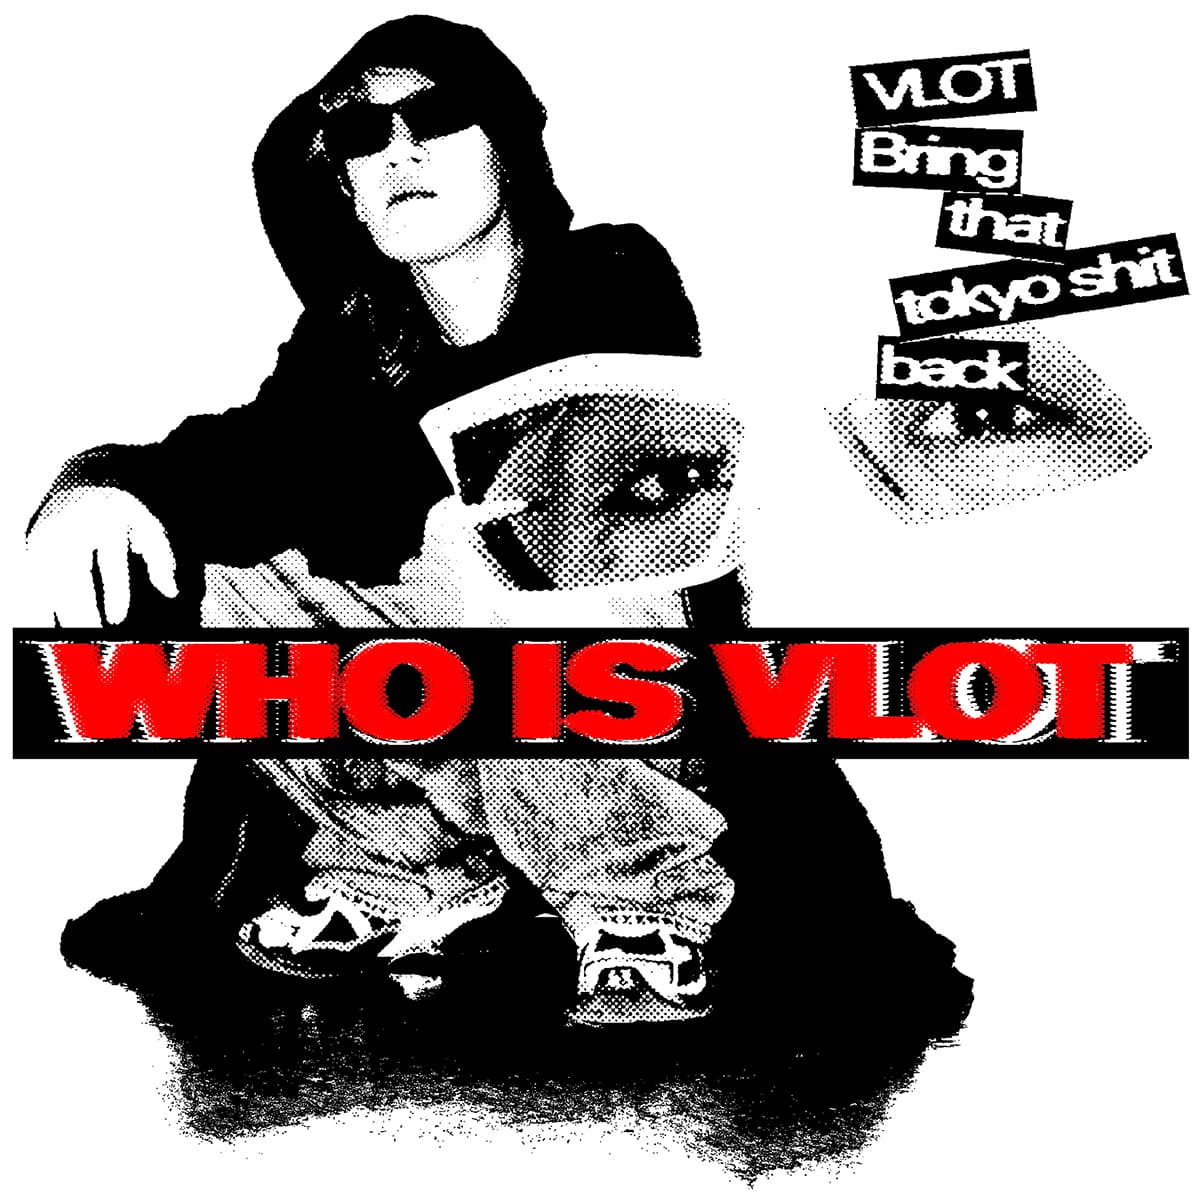 Released the first full album "WHO IS VLOT" in his own name of VLOT!